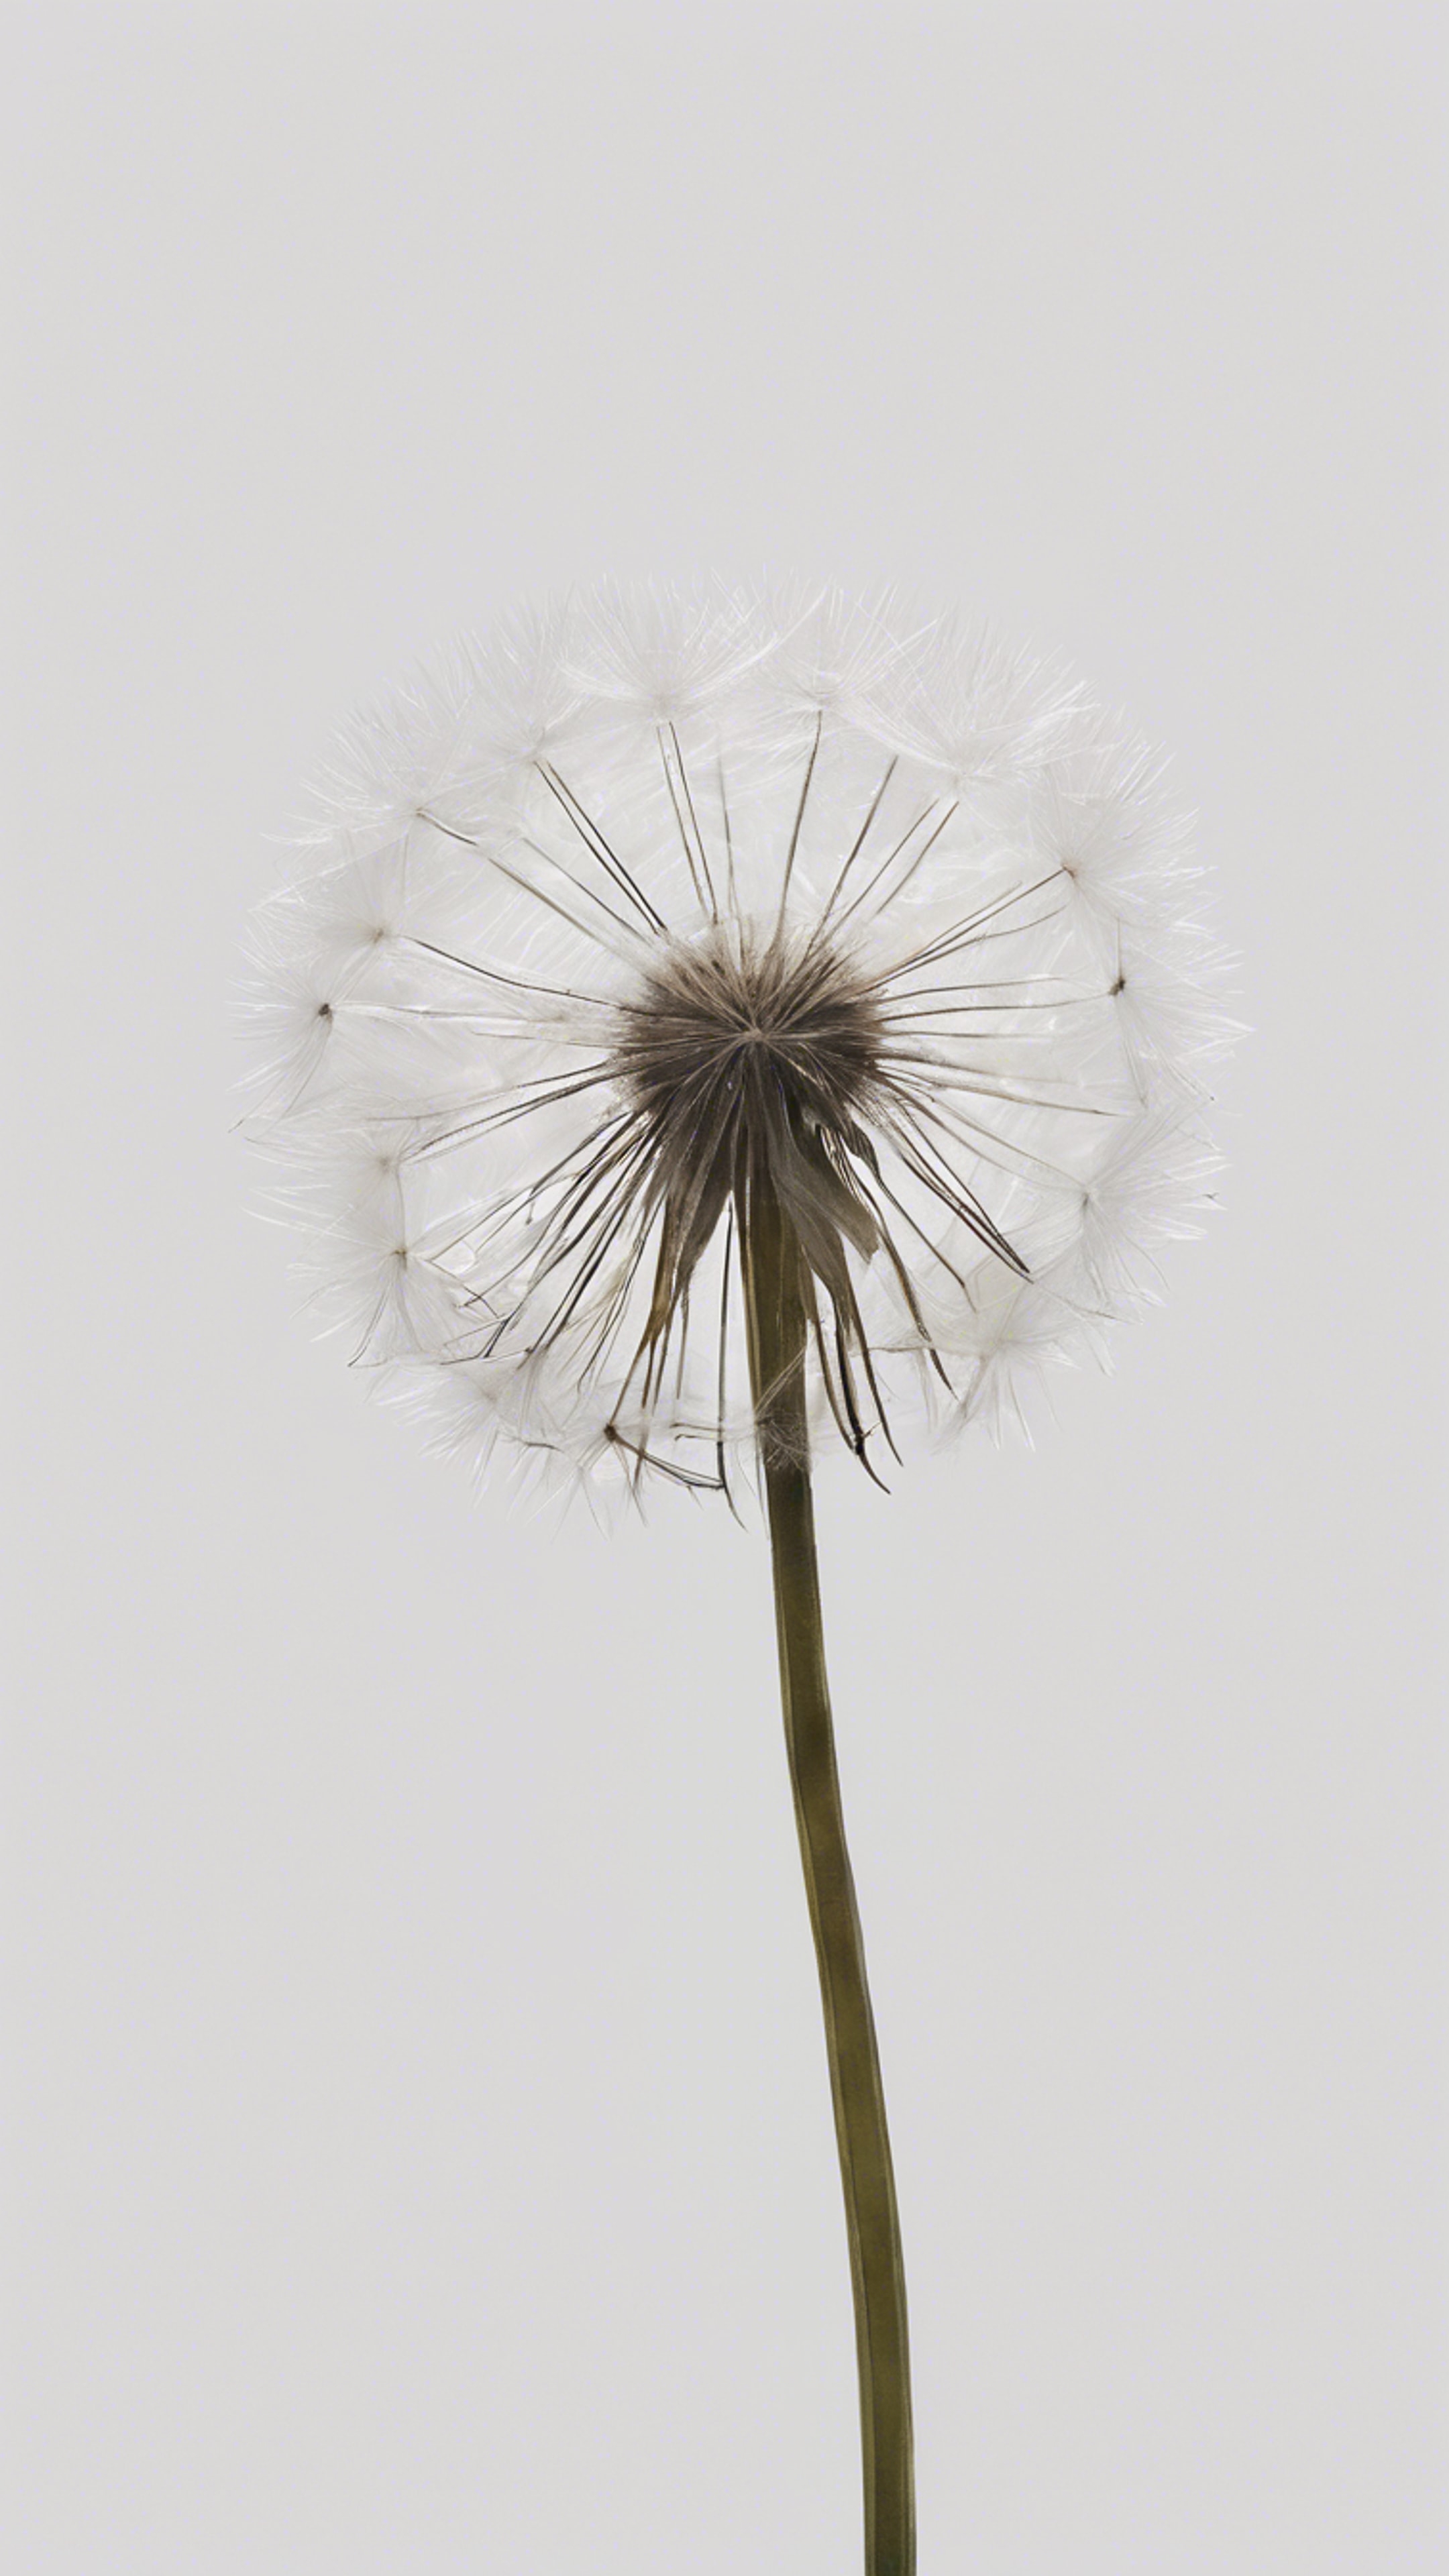 A minimalist painting of a single dandelion against a stark white background.壁紙[1a7d3f5abf0146ff8890]